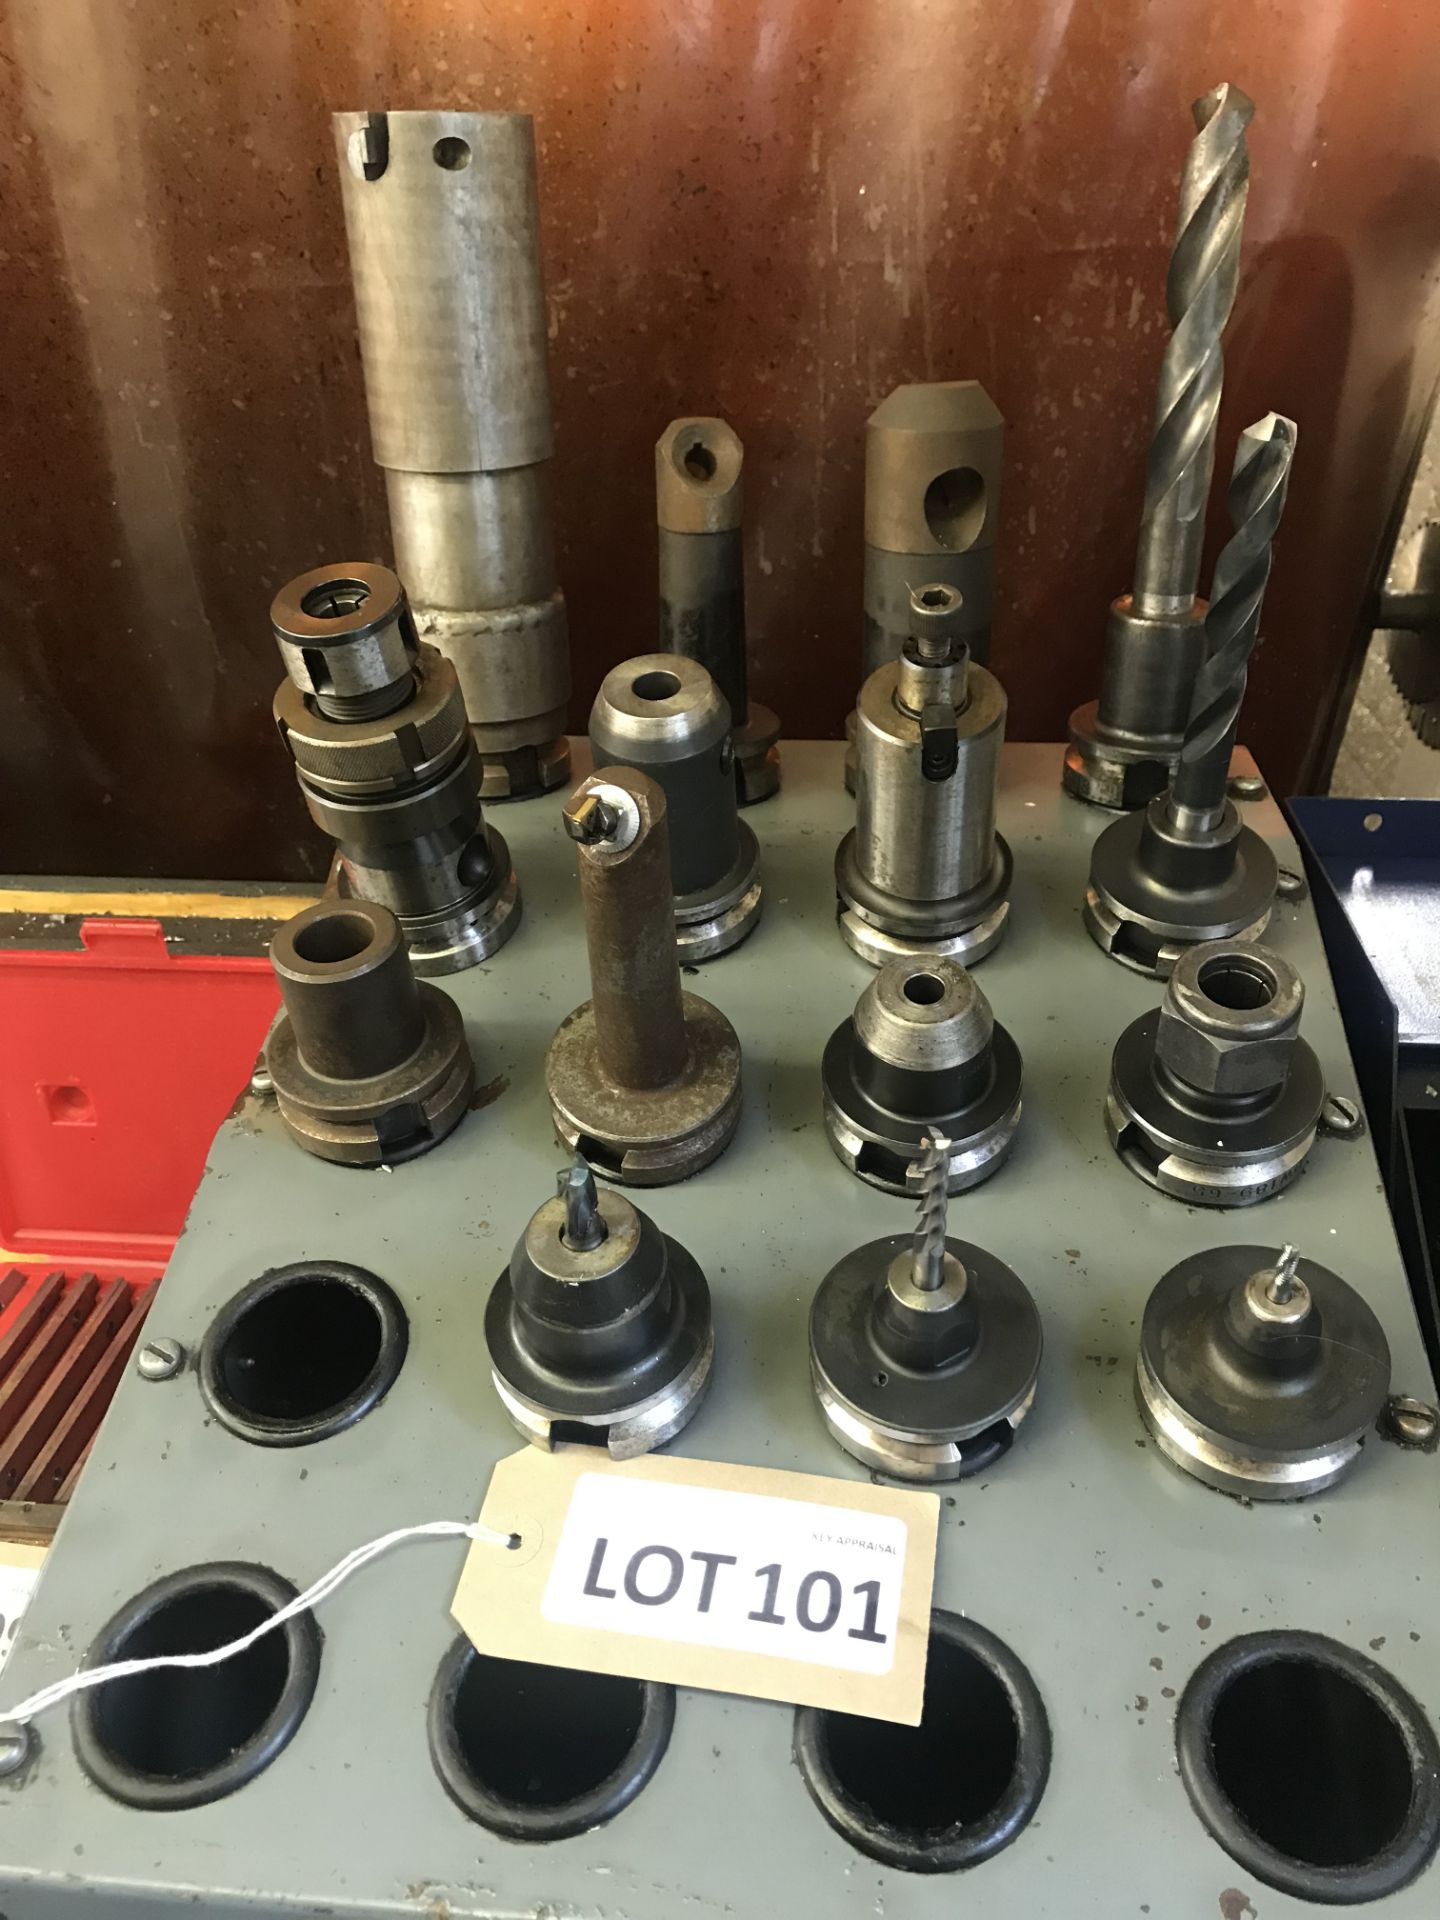 15 x 40 Int toolholders/tools/collects, as lotted